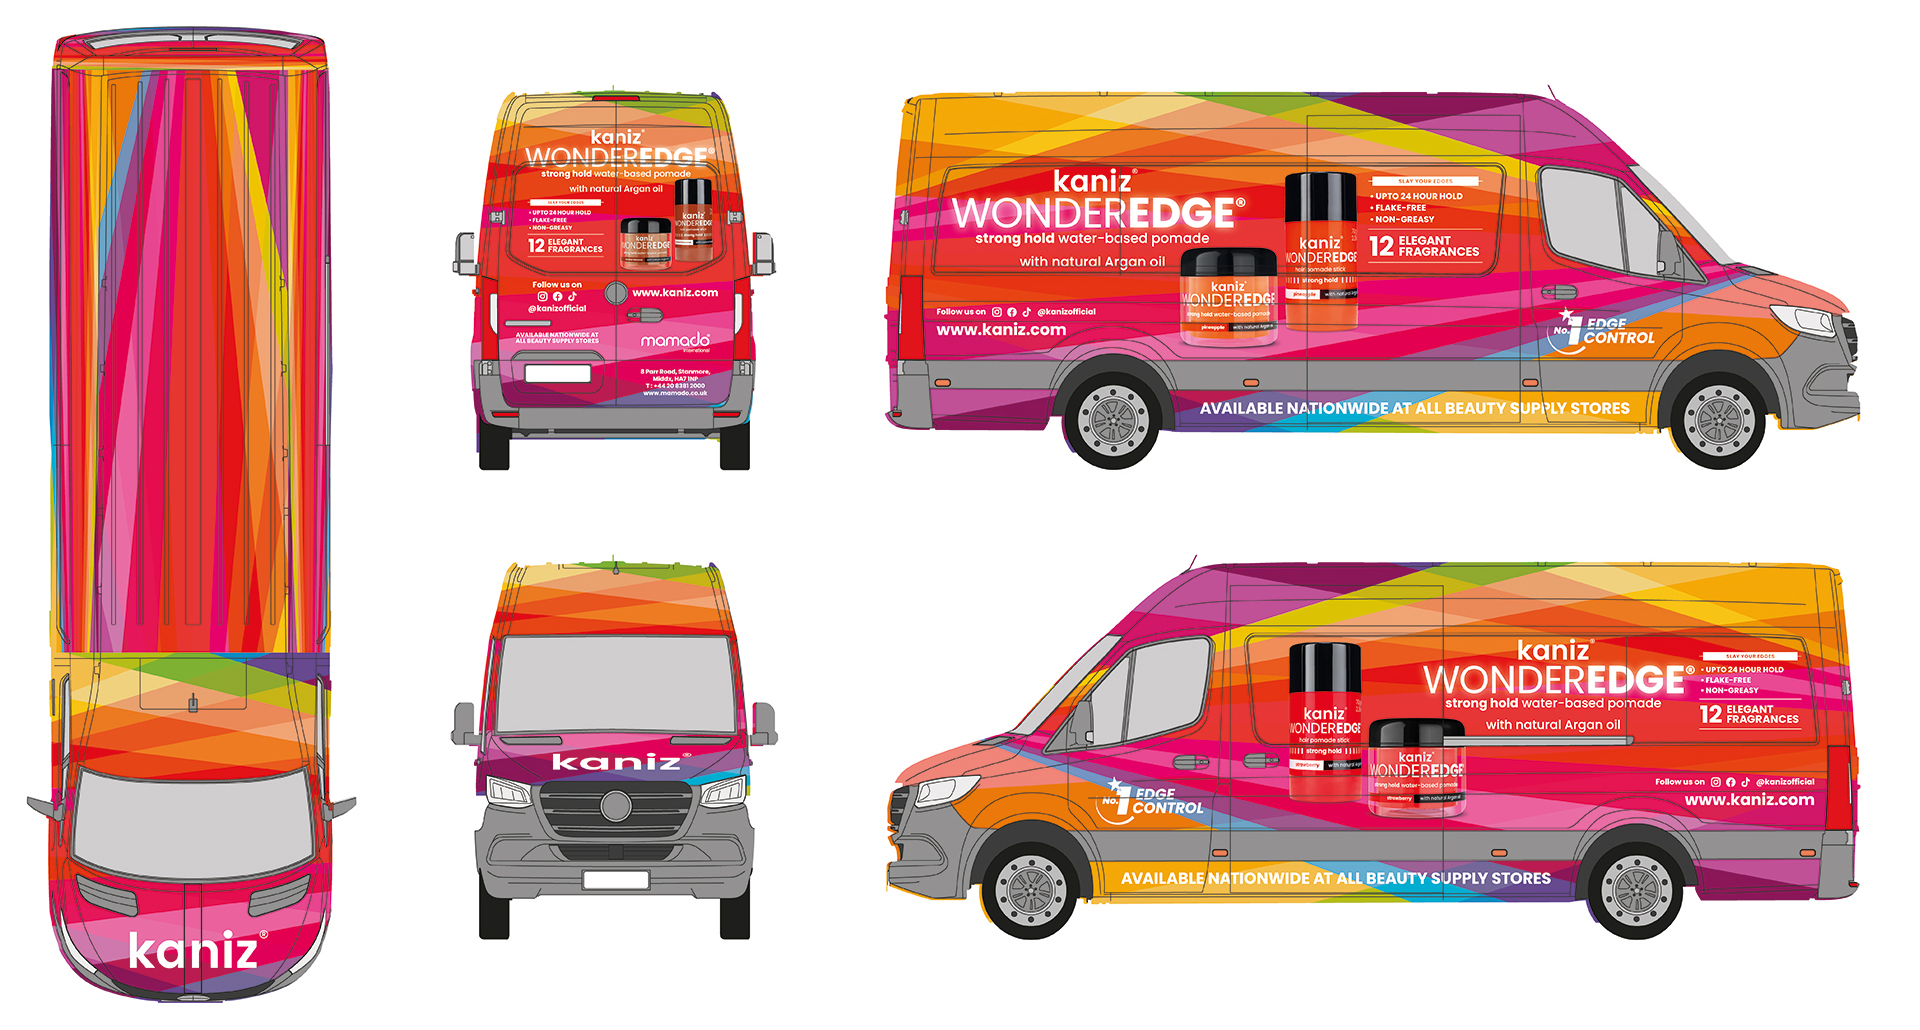 Illustration of a van wrapped with Kaniz WonderEdge edge control product graphics designed by Paul Cartwright Branding.